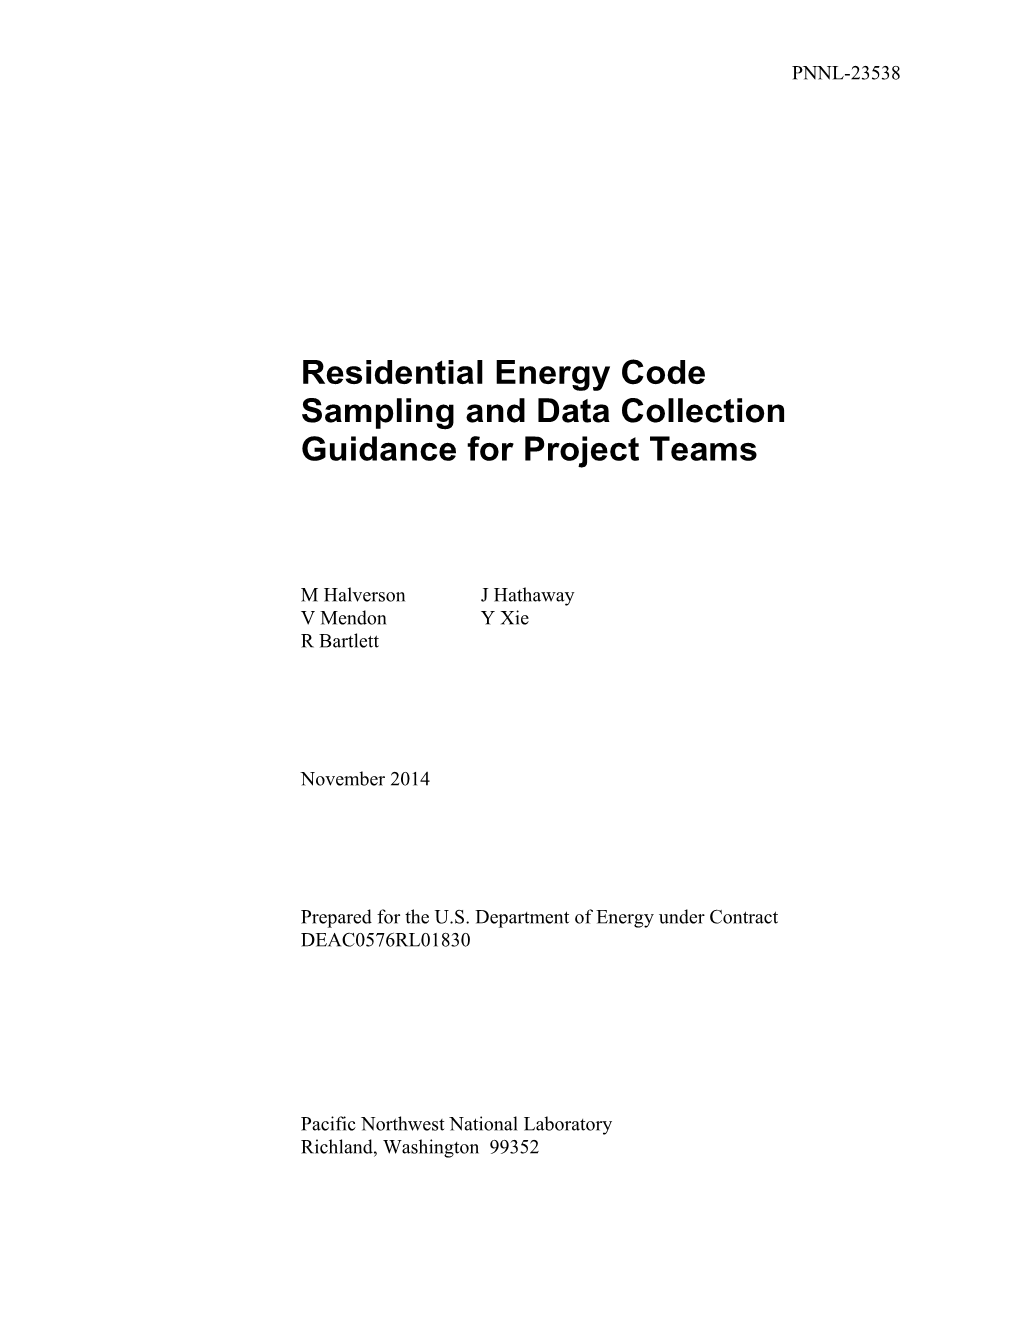 Residential Energy Code Sampling and Data Collection Guidance for Project Teams